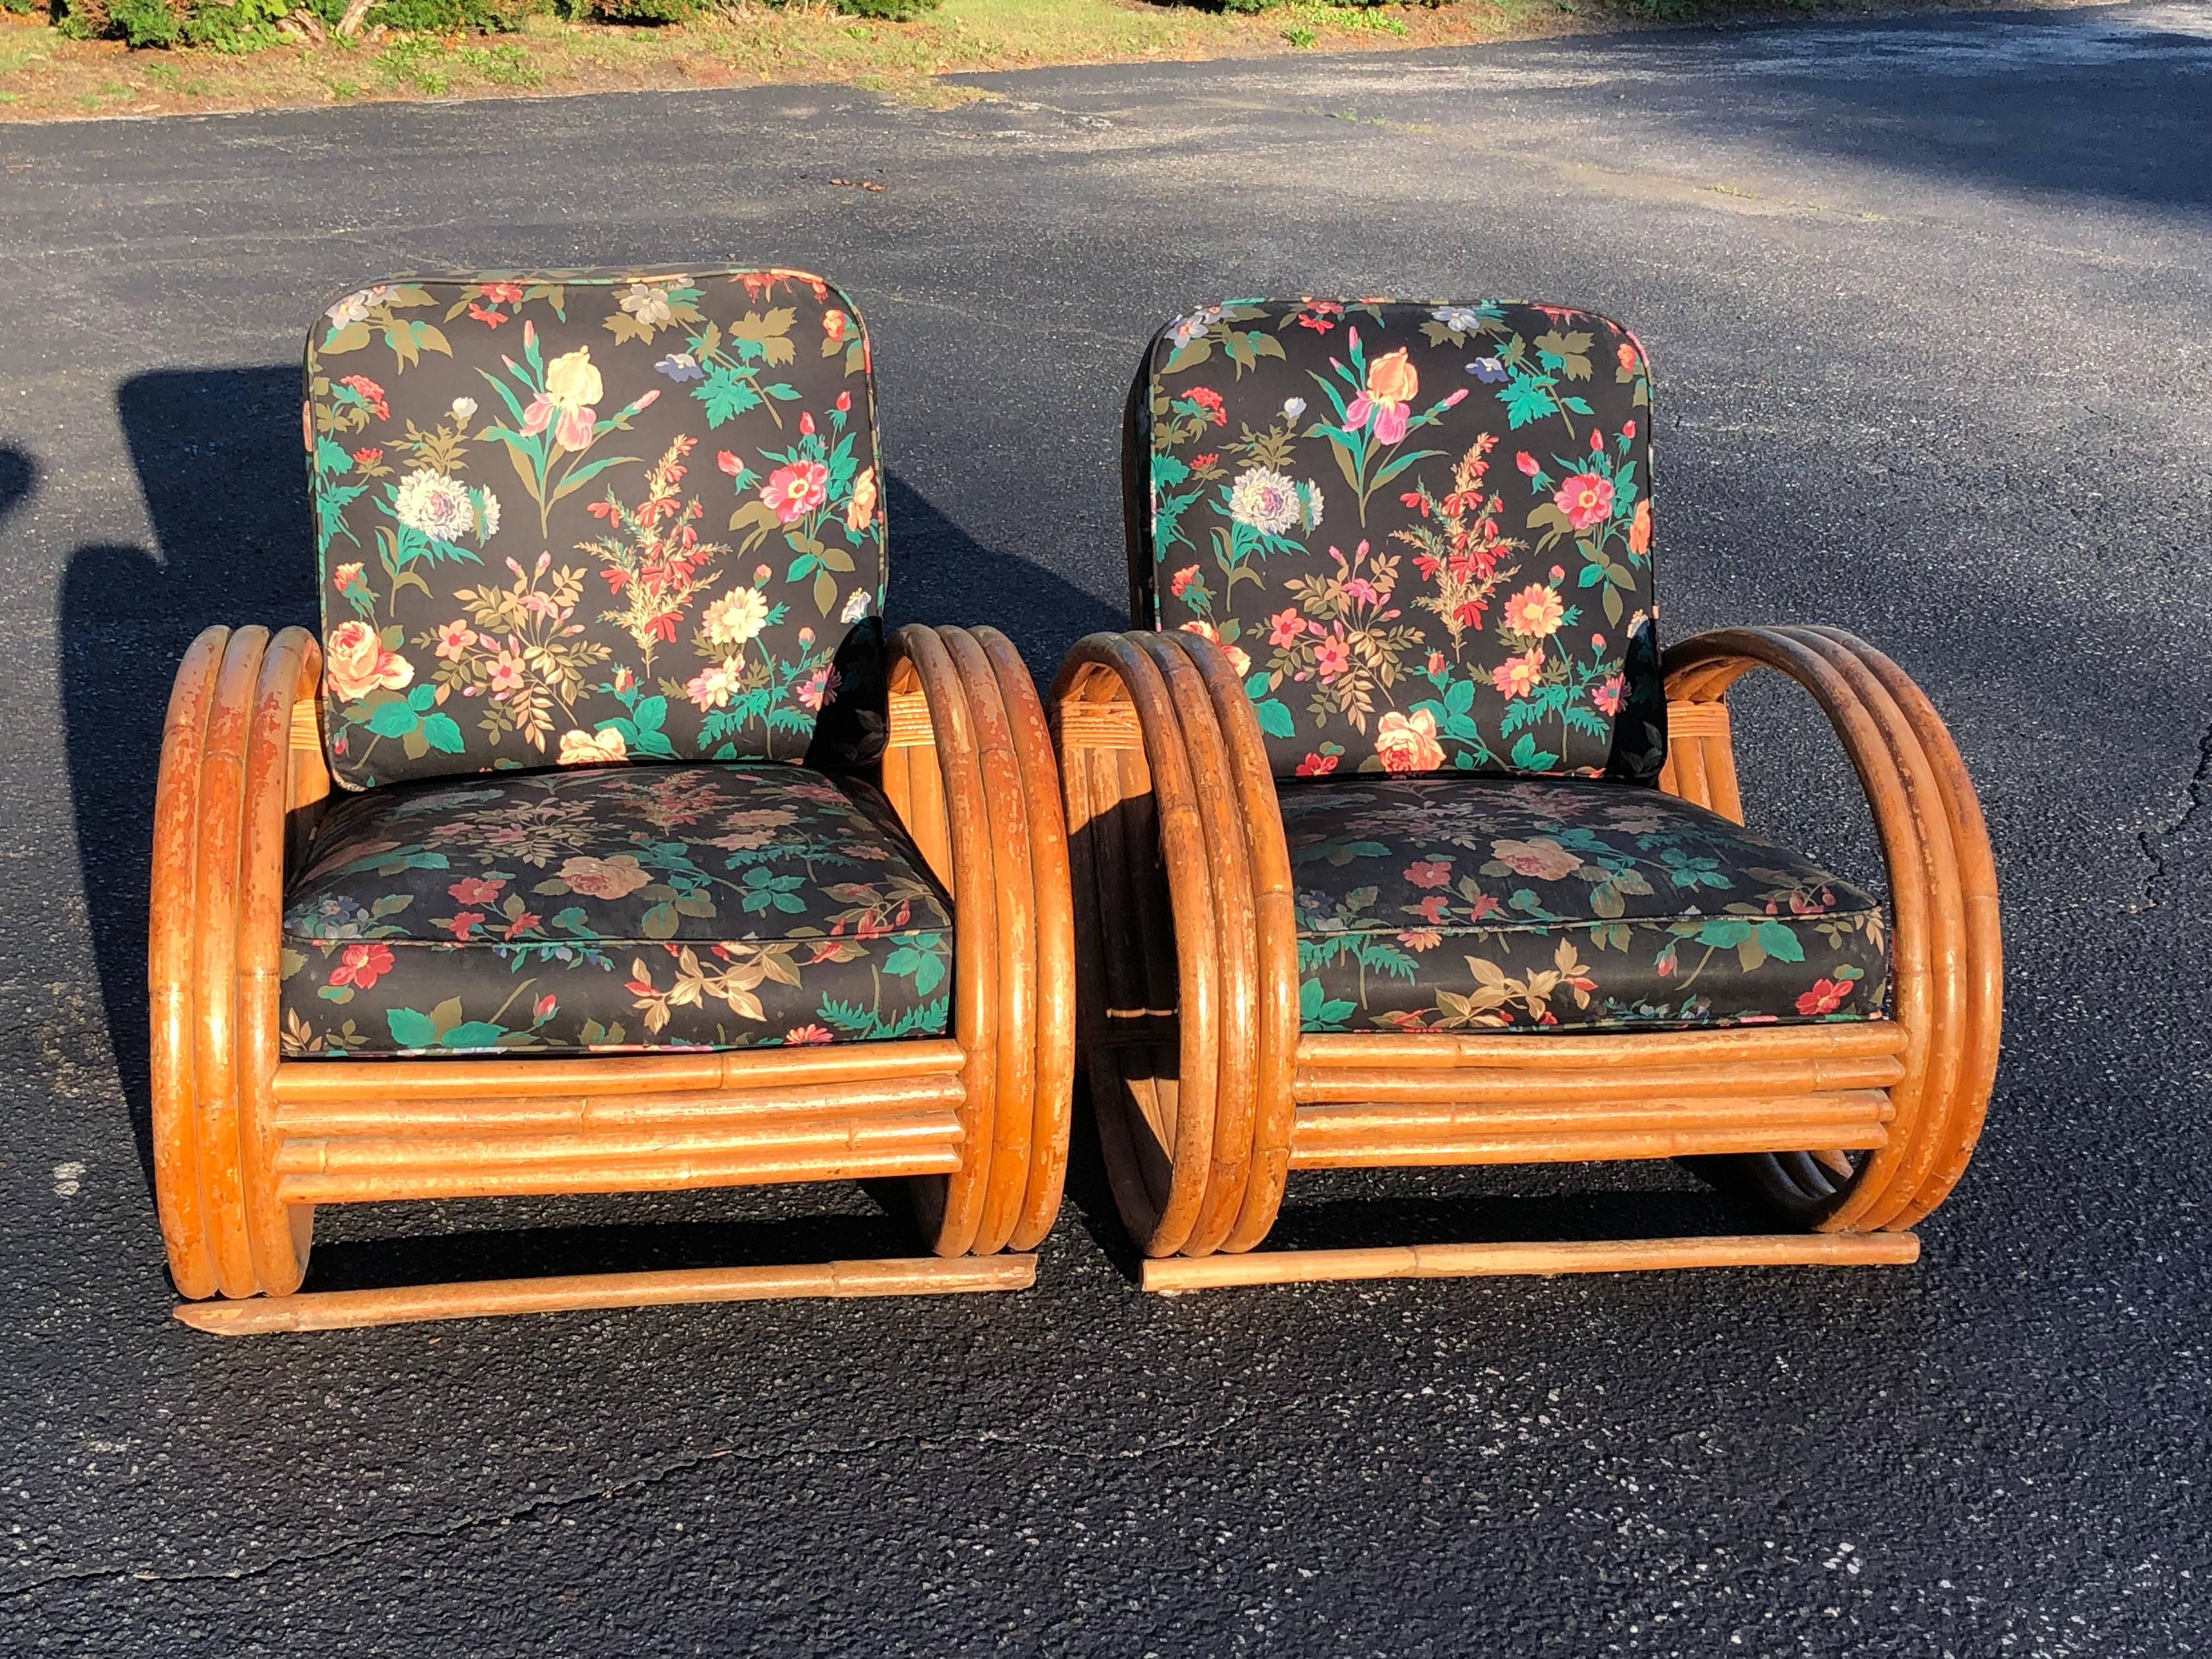 Pair of Rattan Lounge Chairs in the style of Paul Frankl. Reminiscent of his pretzel chairs and of Ritts Tropitan furniture. Heavy , solid cushions. Perfect for a screened in porch or veranda.